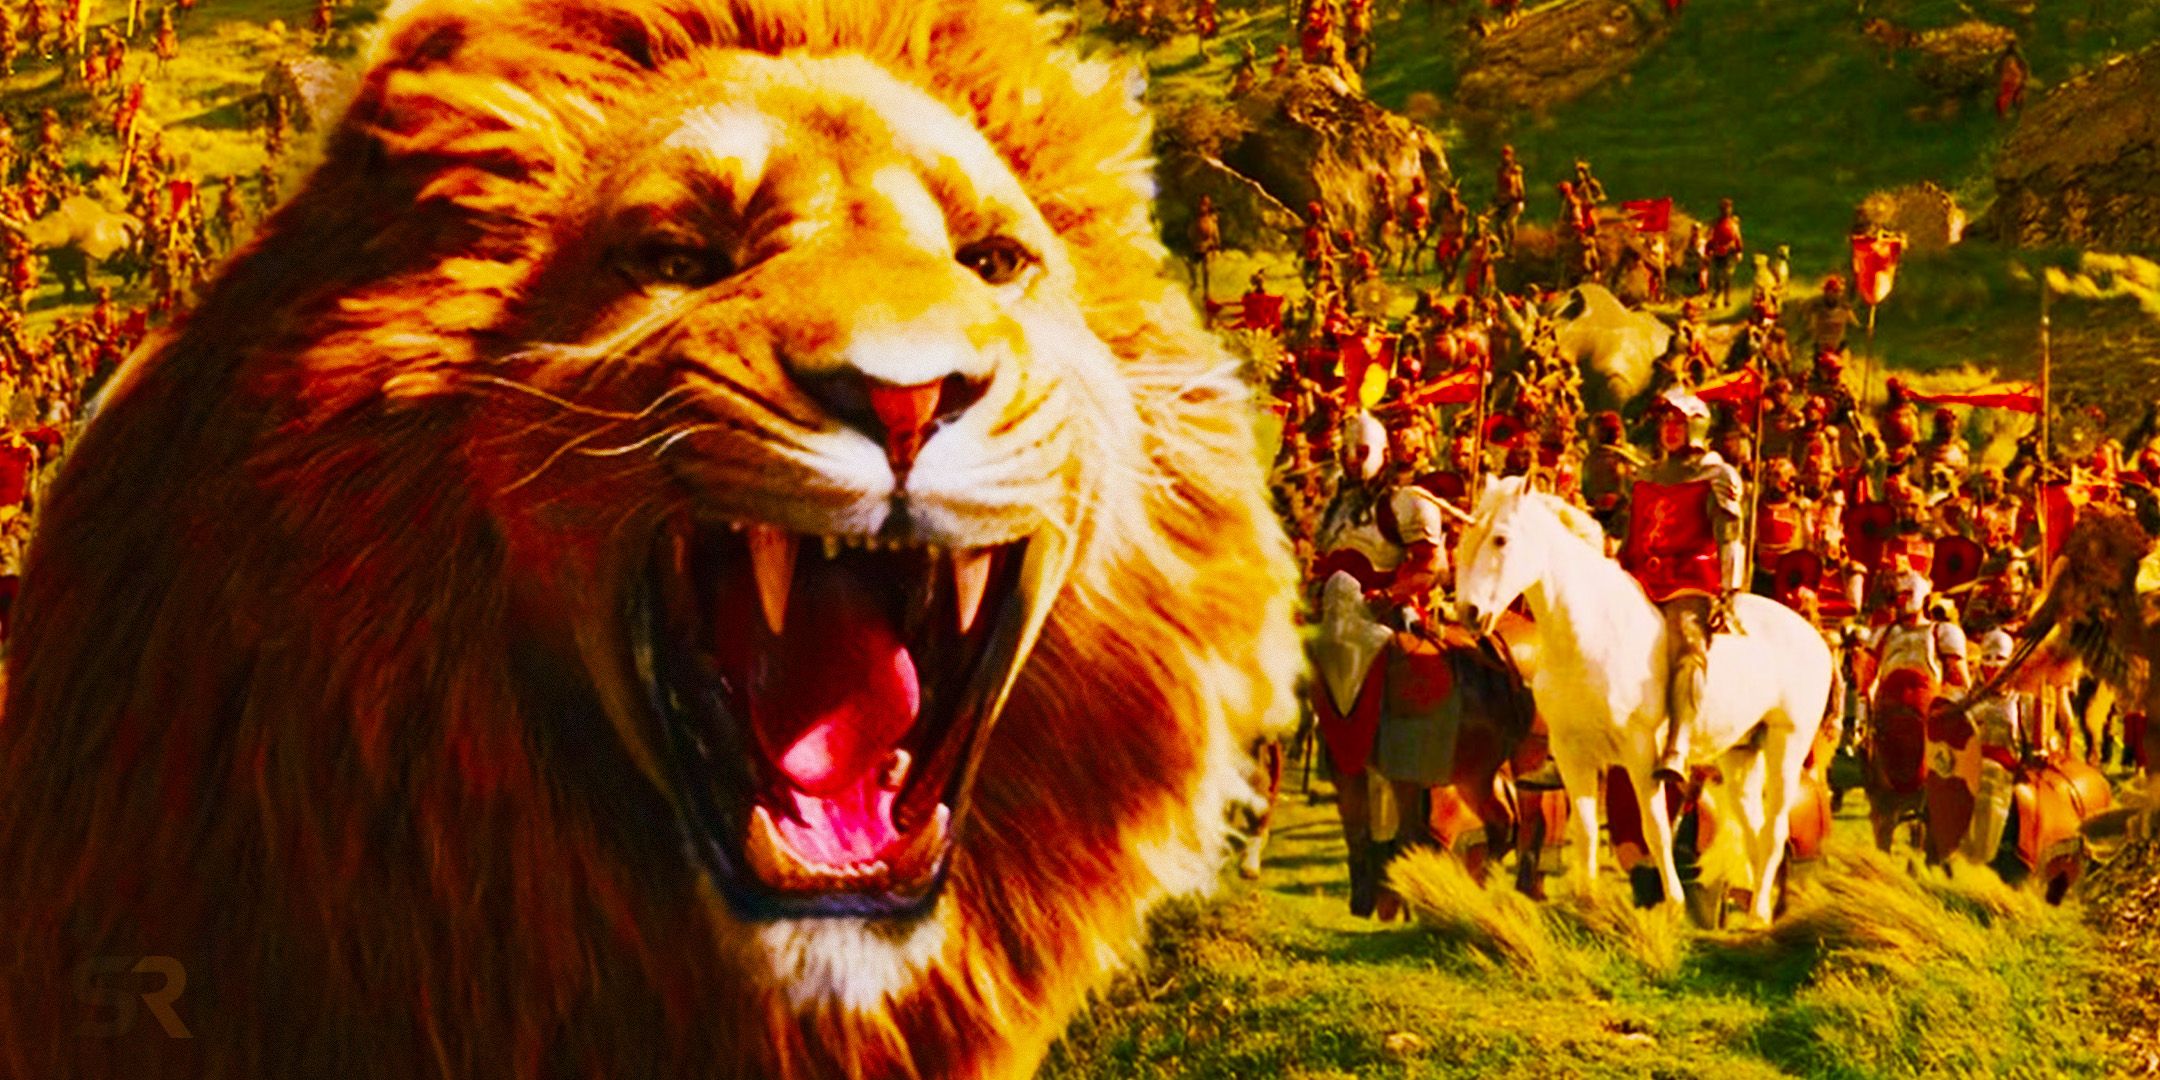 Aslan and the battle scene from The Chronicles of Narnia